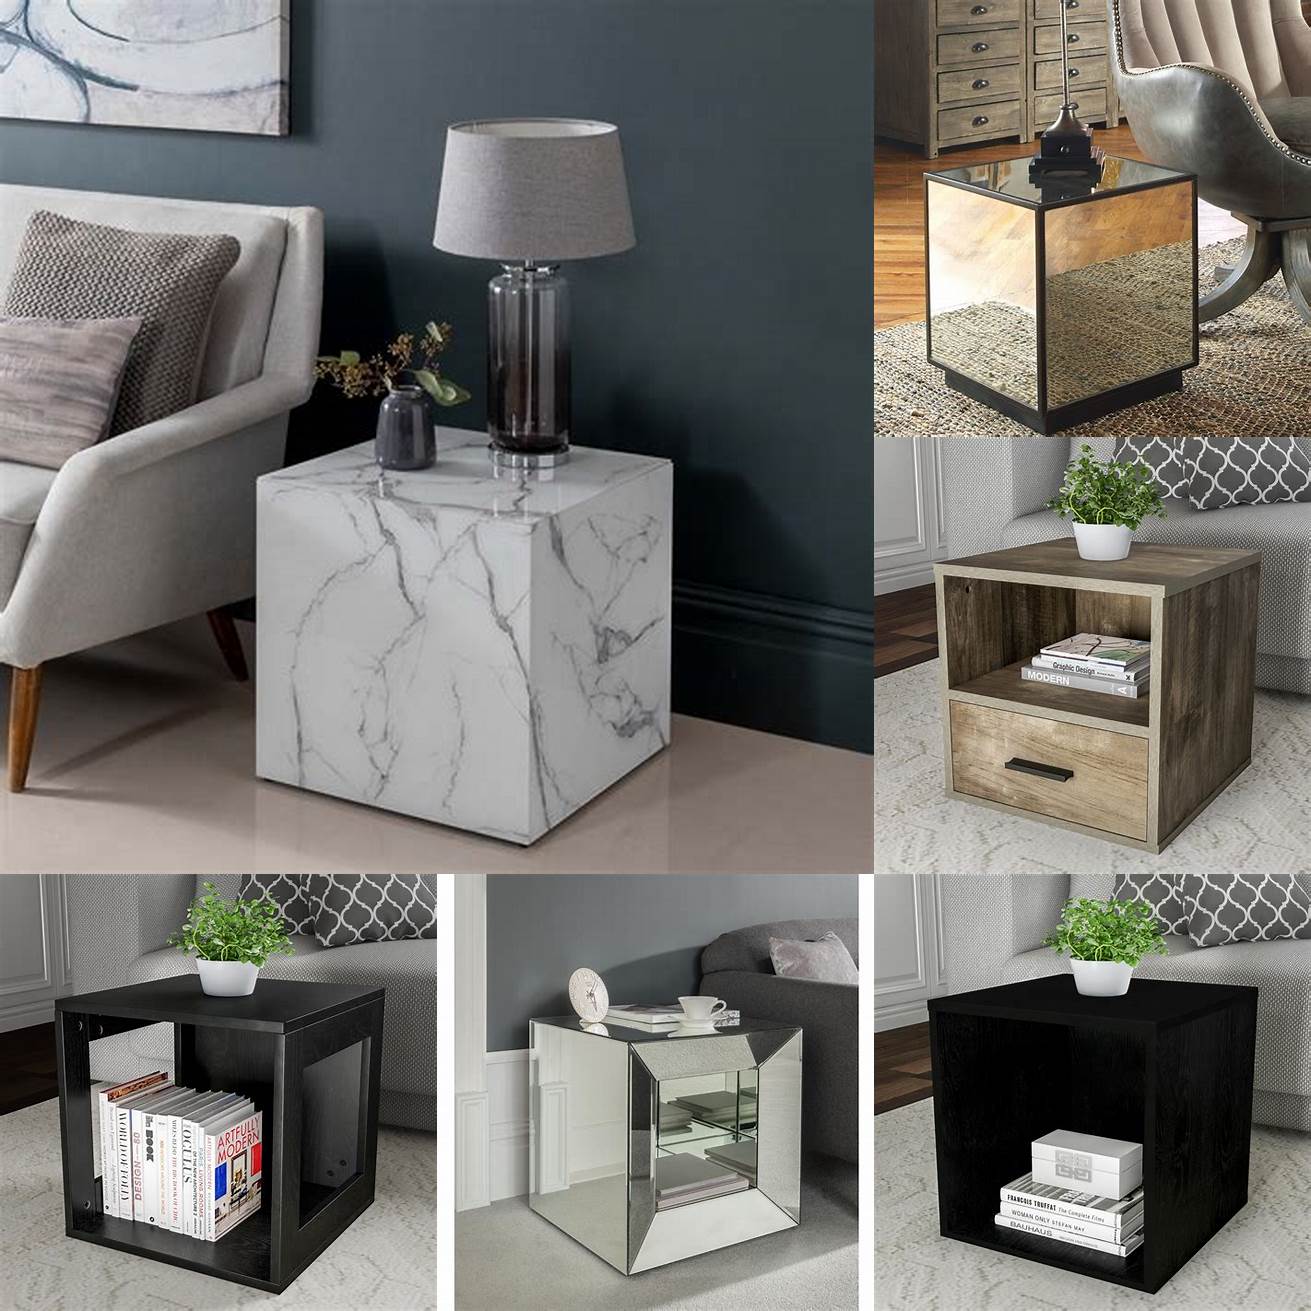 Cube side tables in a bedroom